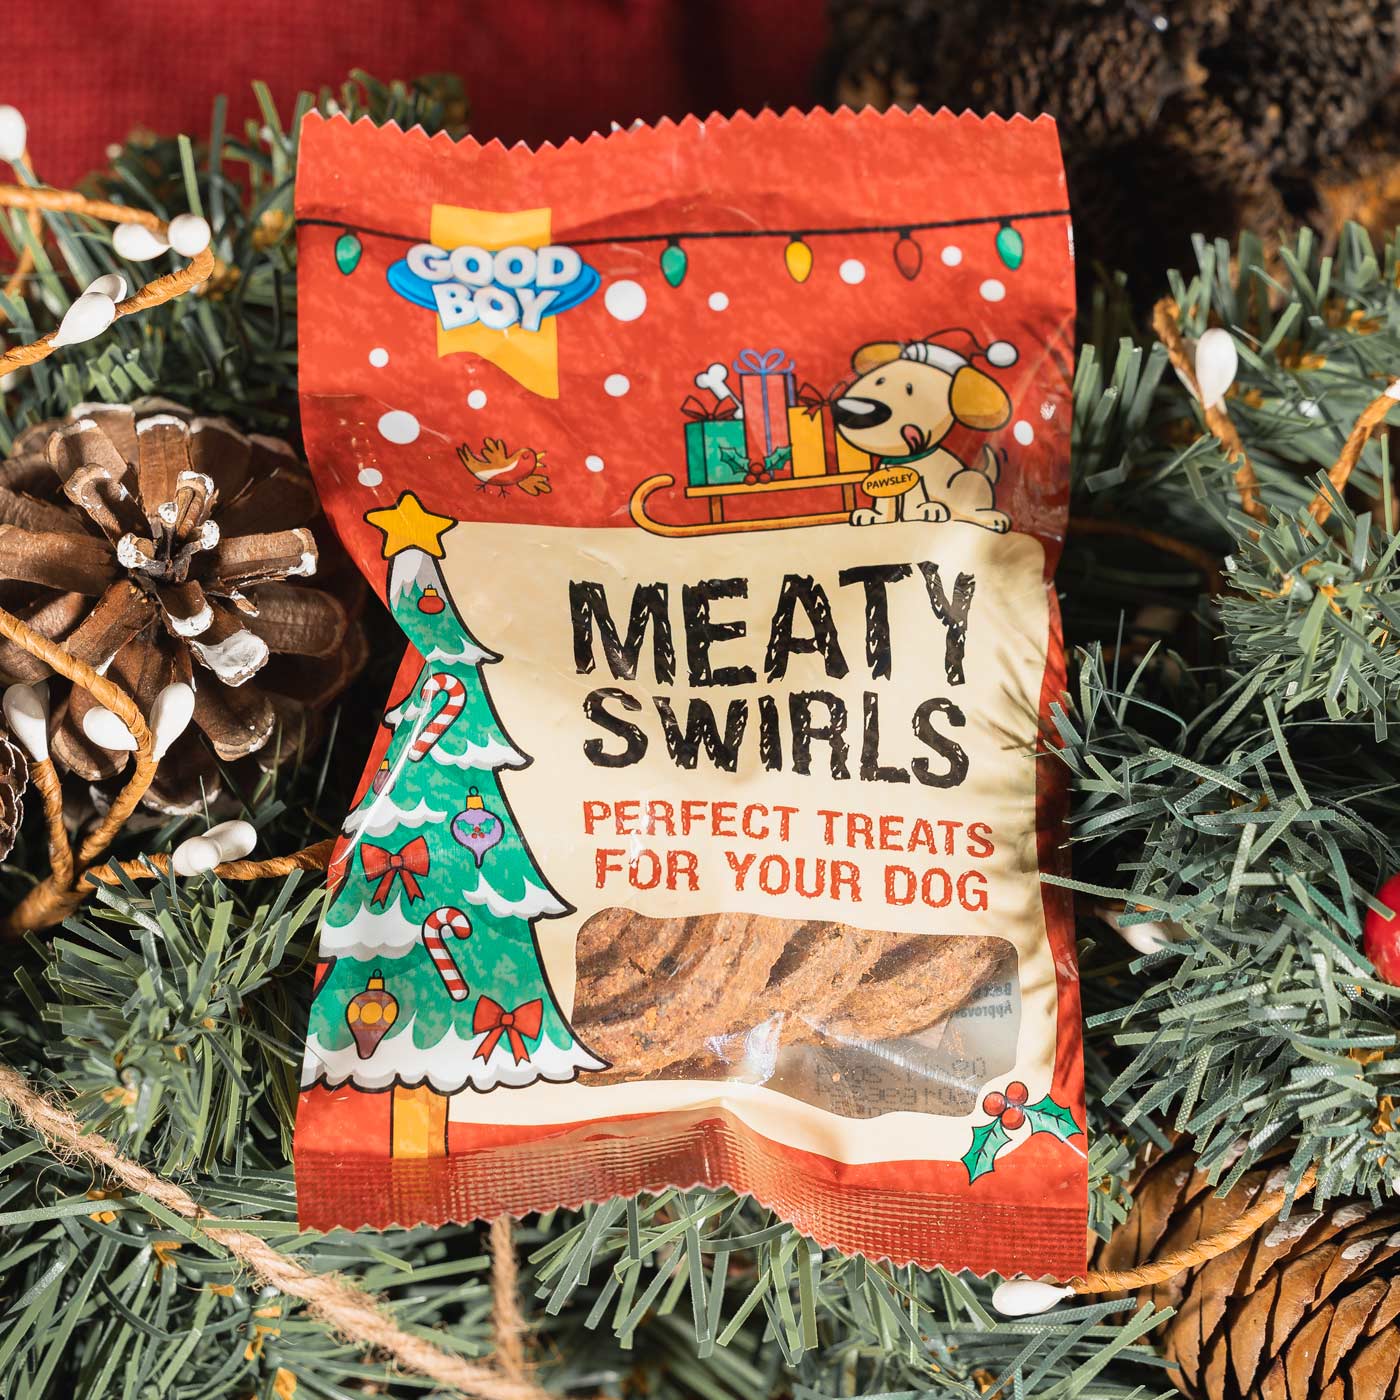 Good Boy Festive Dog Treats Gift Box, Meaty Swirl Pet Treats, The Perfect Christmas Gift For Your Dog, Available Now at Lords & Labradors